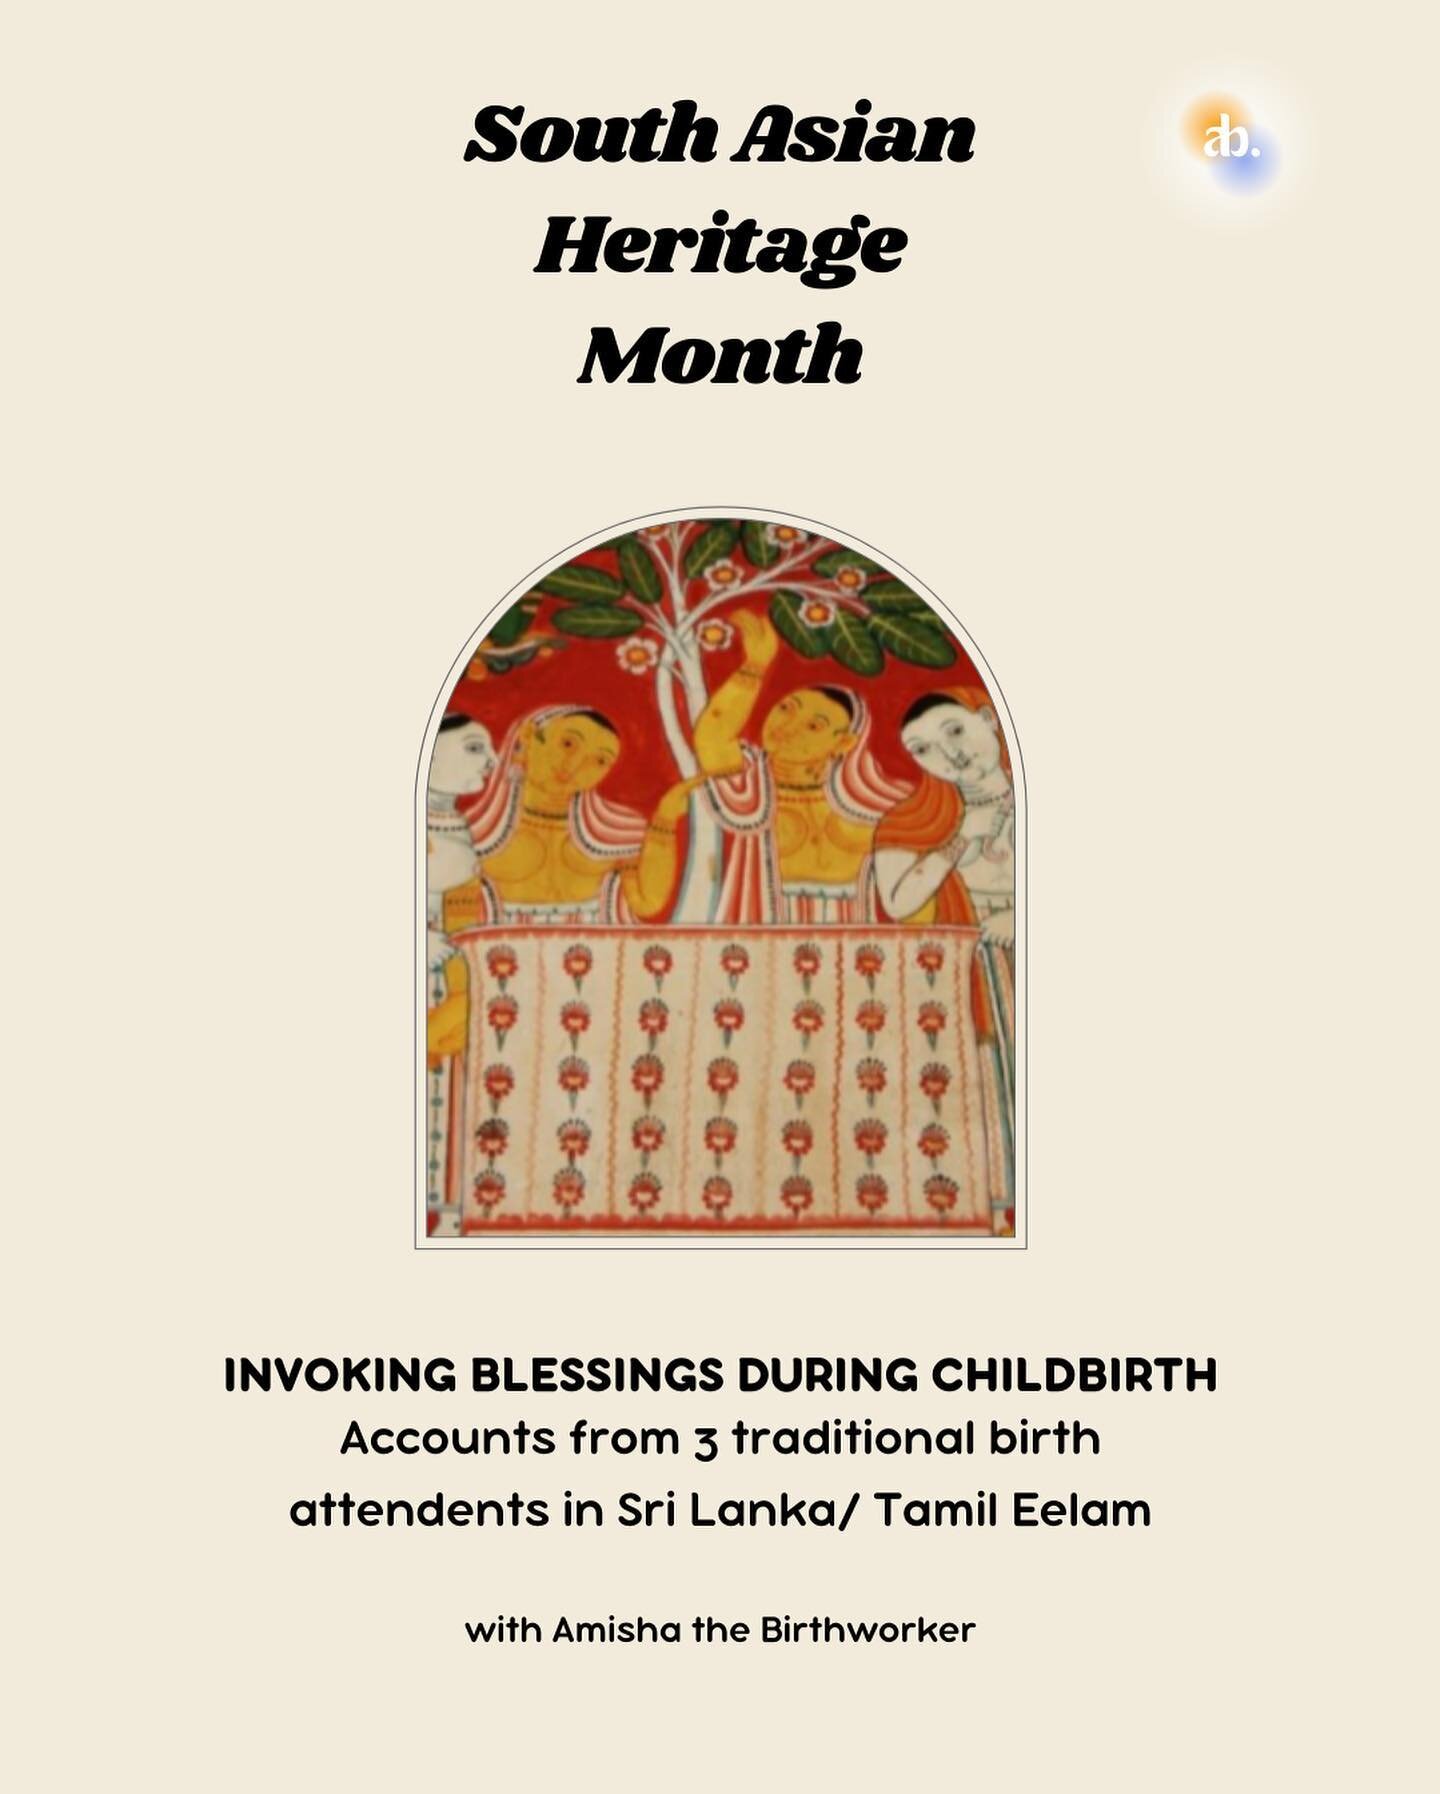 ✨ Invoking blessings during childbirth ✨

Accounts from 3 traditional birth attendants in Sri Lanka/ Tamil Eelam.

This week I will be focusing on traditions relating to my place of origin.

I was moved by these accounts from traditional birth attend